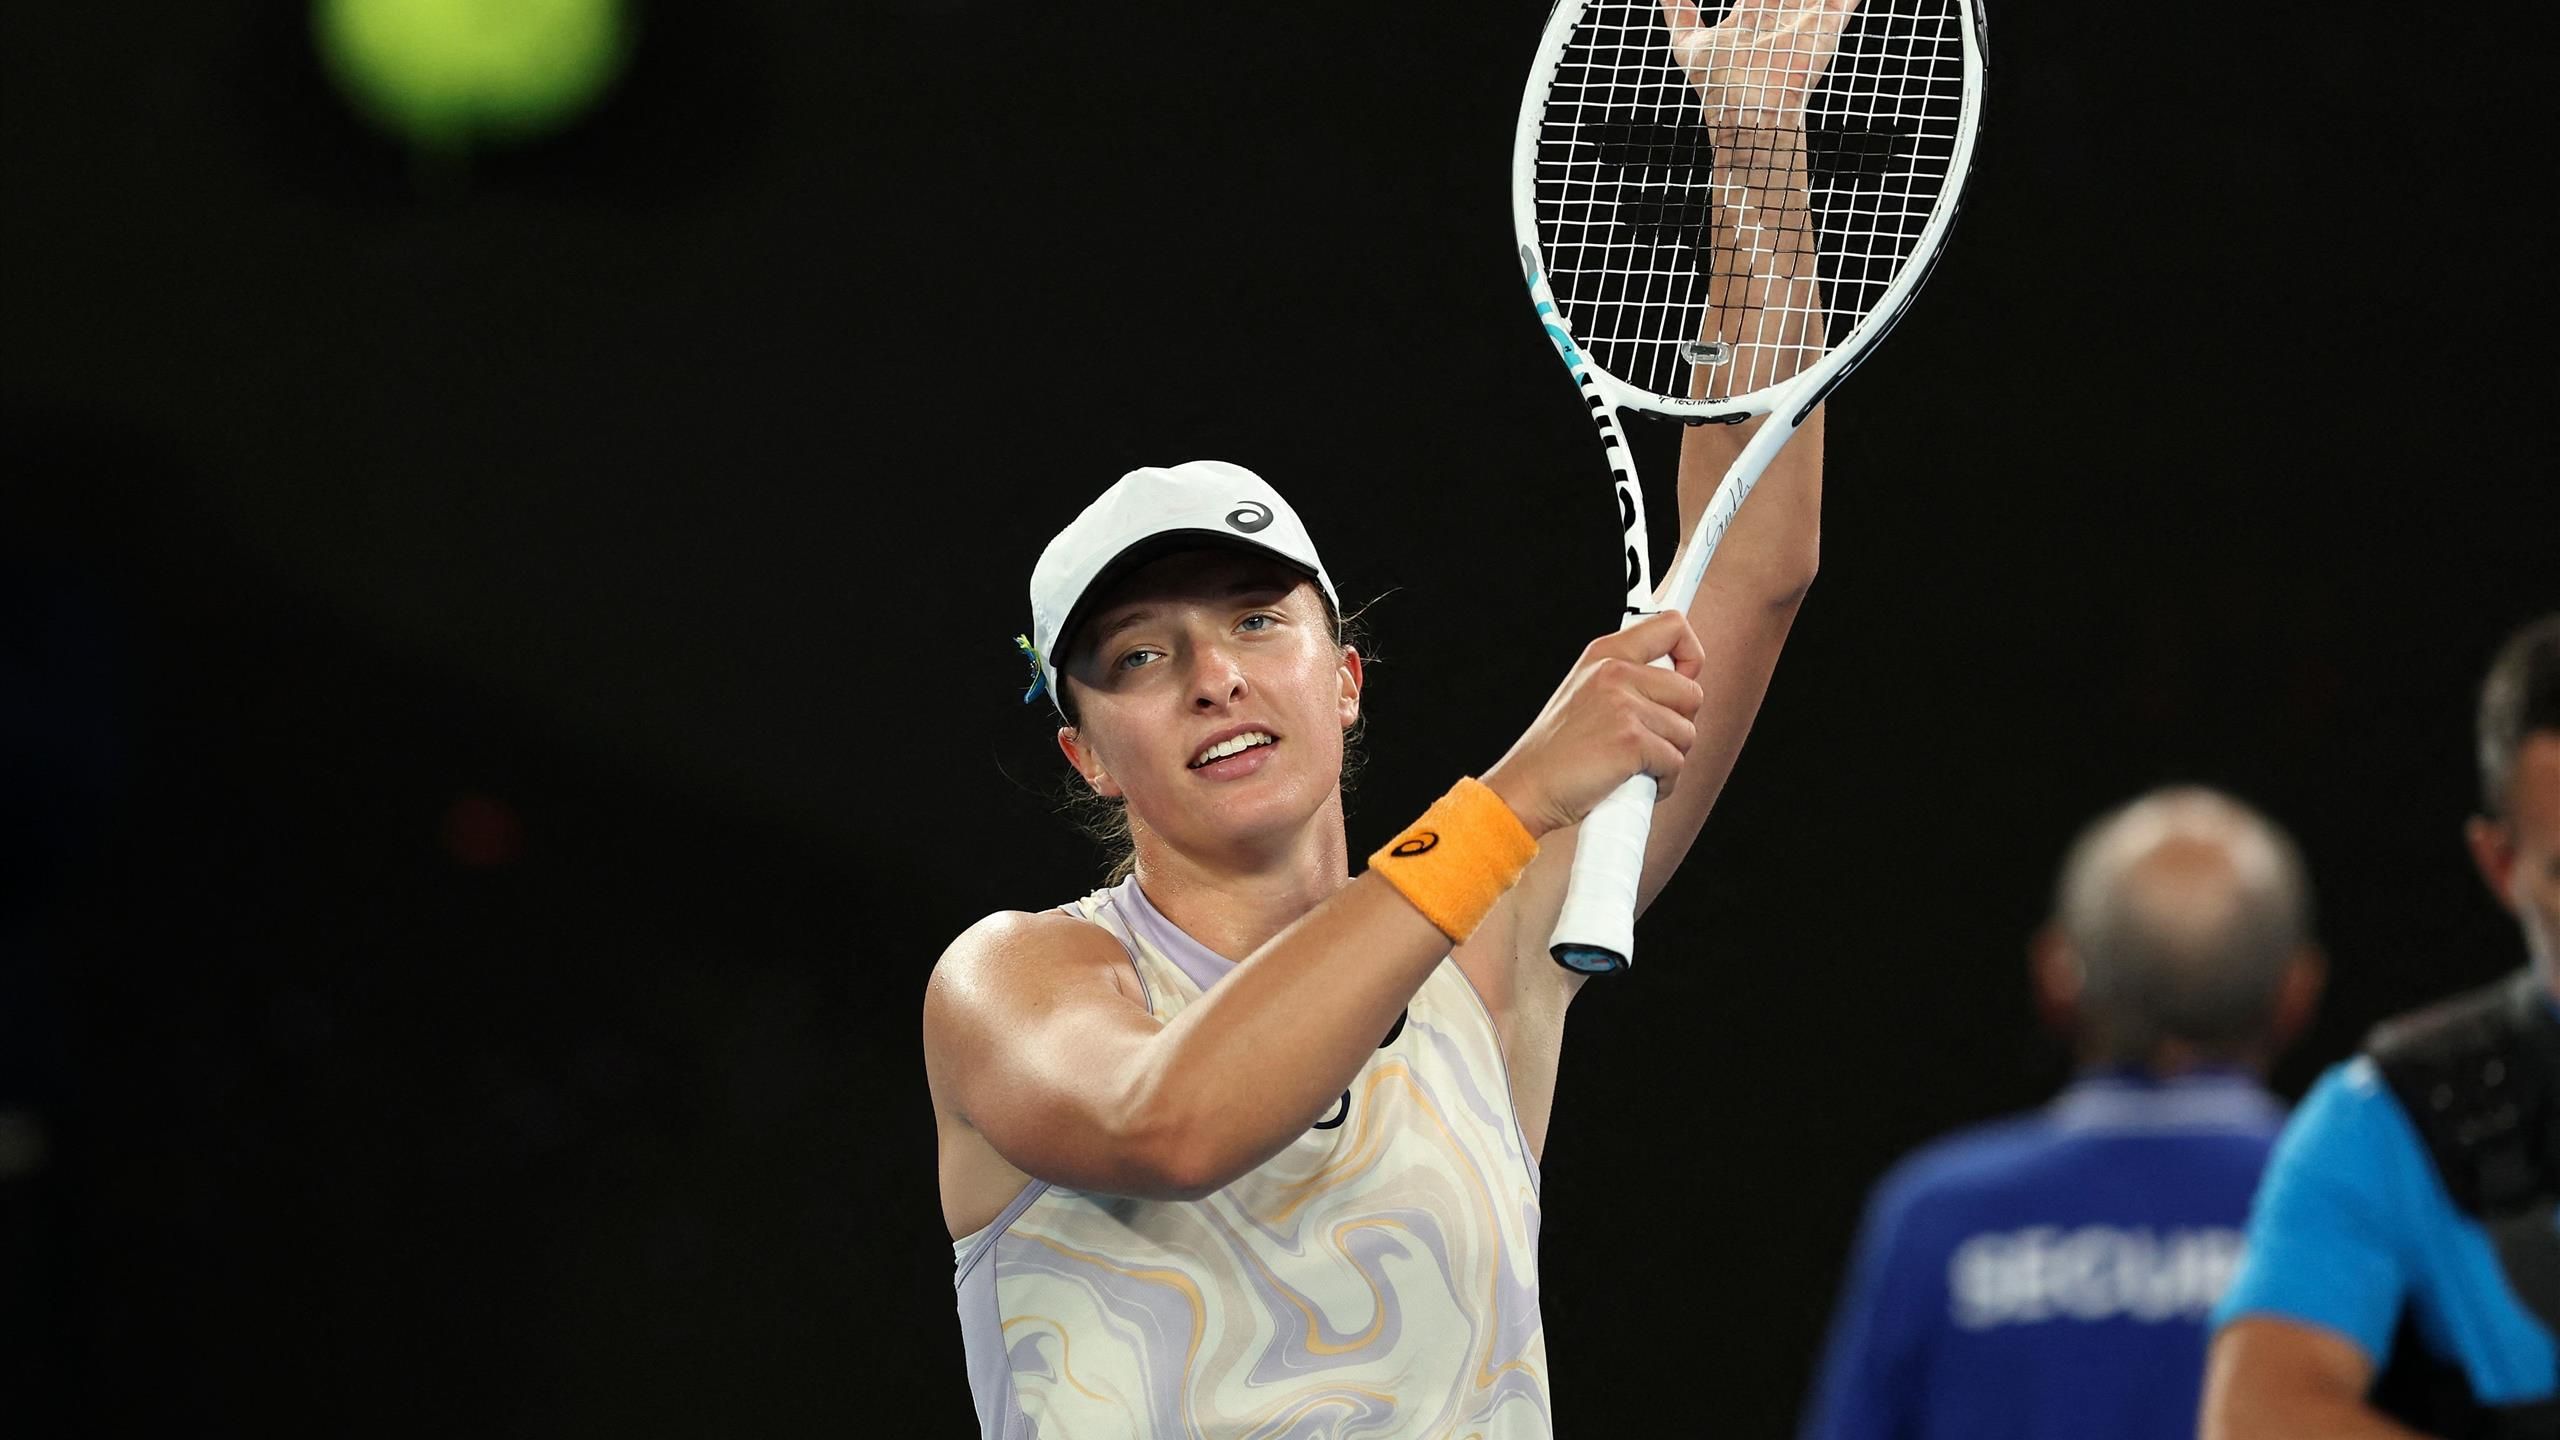 Iga Swiatek surges into Australian Open third round after easy win over Camila Osorio in Melbourne